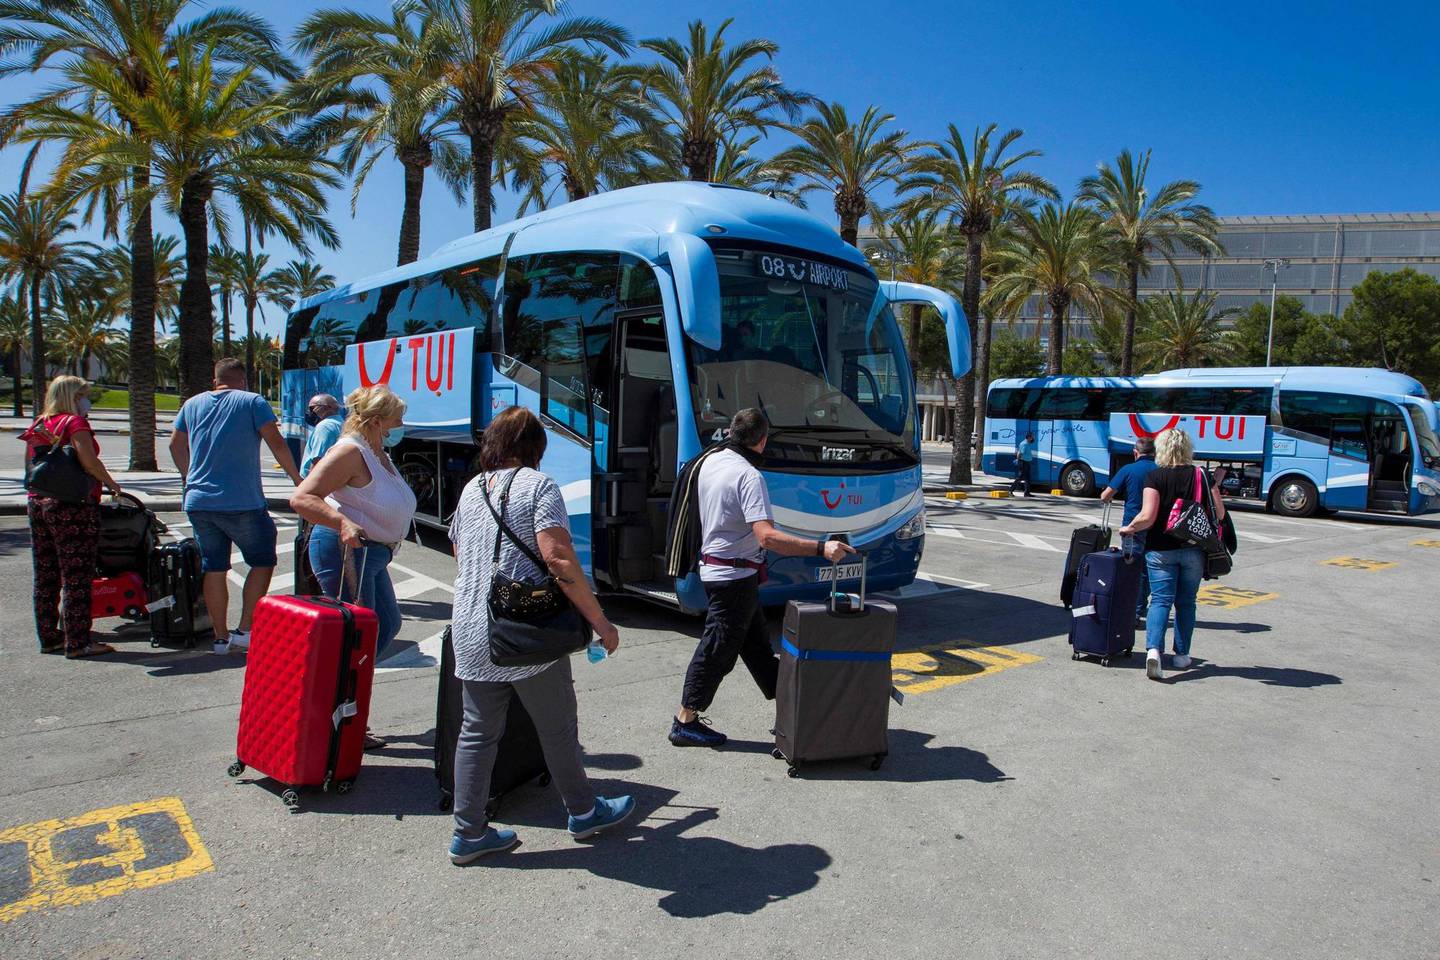 Tourists prepare to board buses upon arrival at the Son Sant Joan airport in Palma de Mallorca on June 22, 2020 as EU member state citizens and those from the passport-free Schengen zone were allowed freely into Spain, with no 14-day quarantines required following a national lockdown to stop the spread of the novel coronavirus. (Photo by JAIME REINA / AFP)